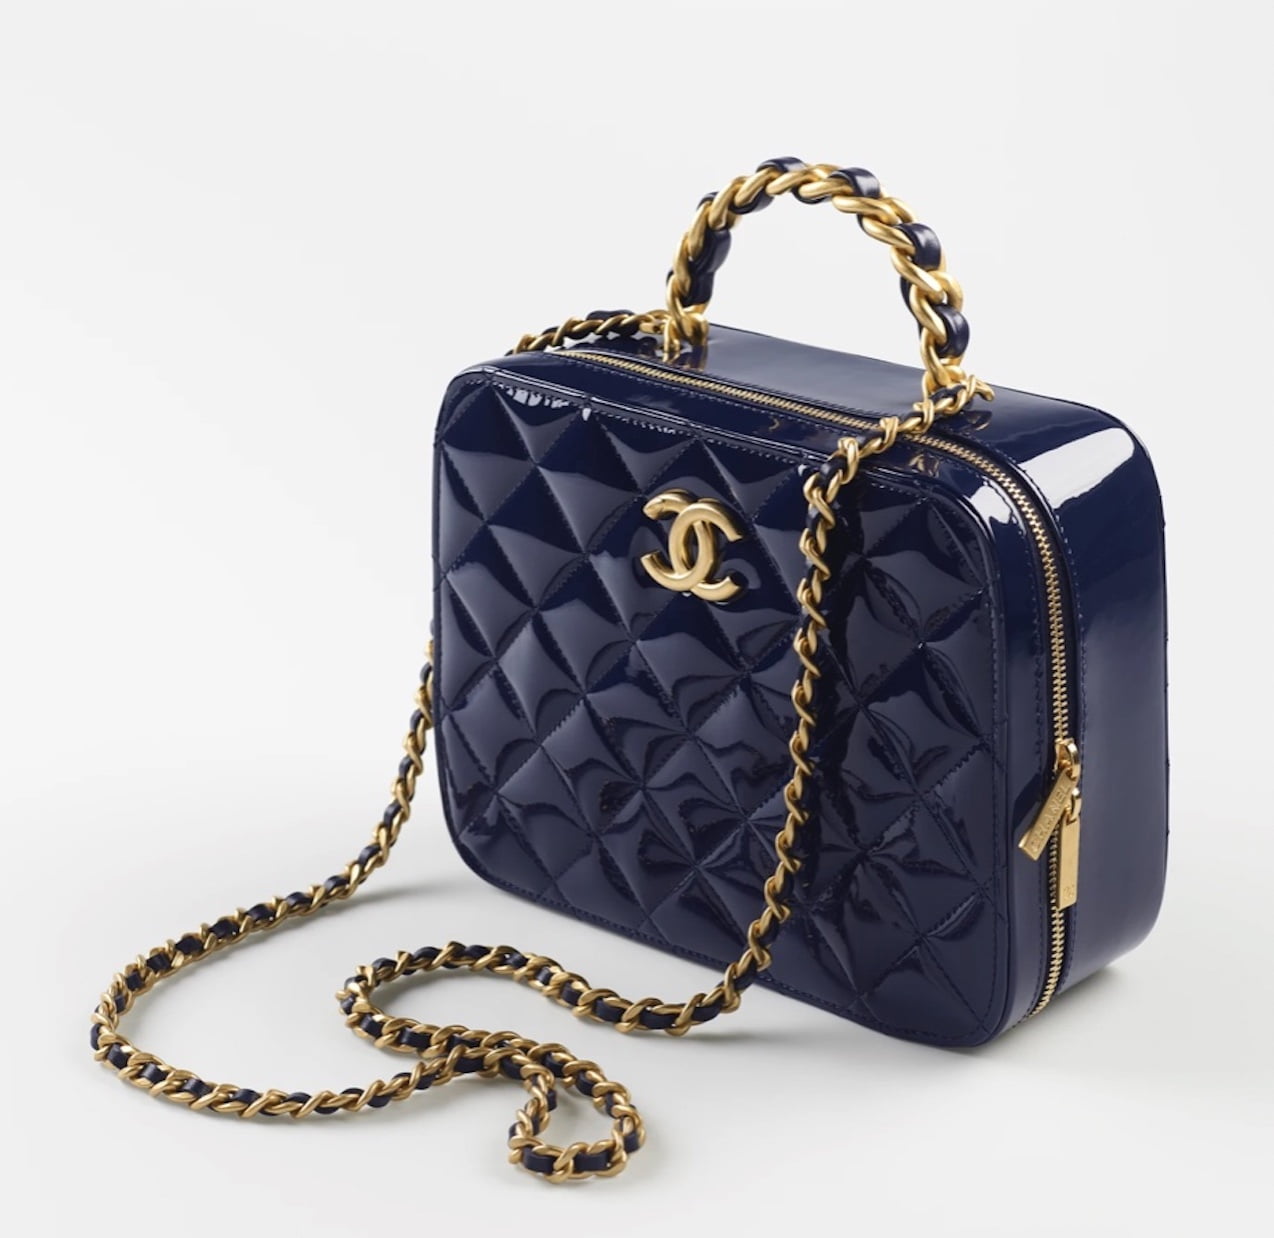 HOT New Chanel Bags Are Here! - Reviewing Chanel Metiers D'Art 2022 